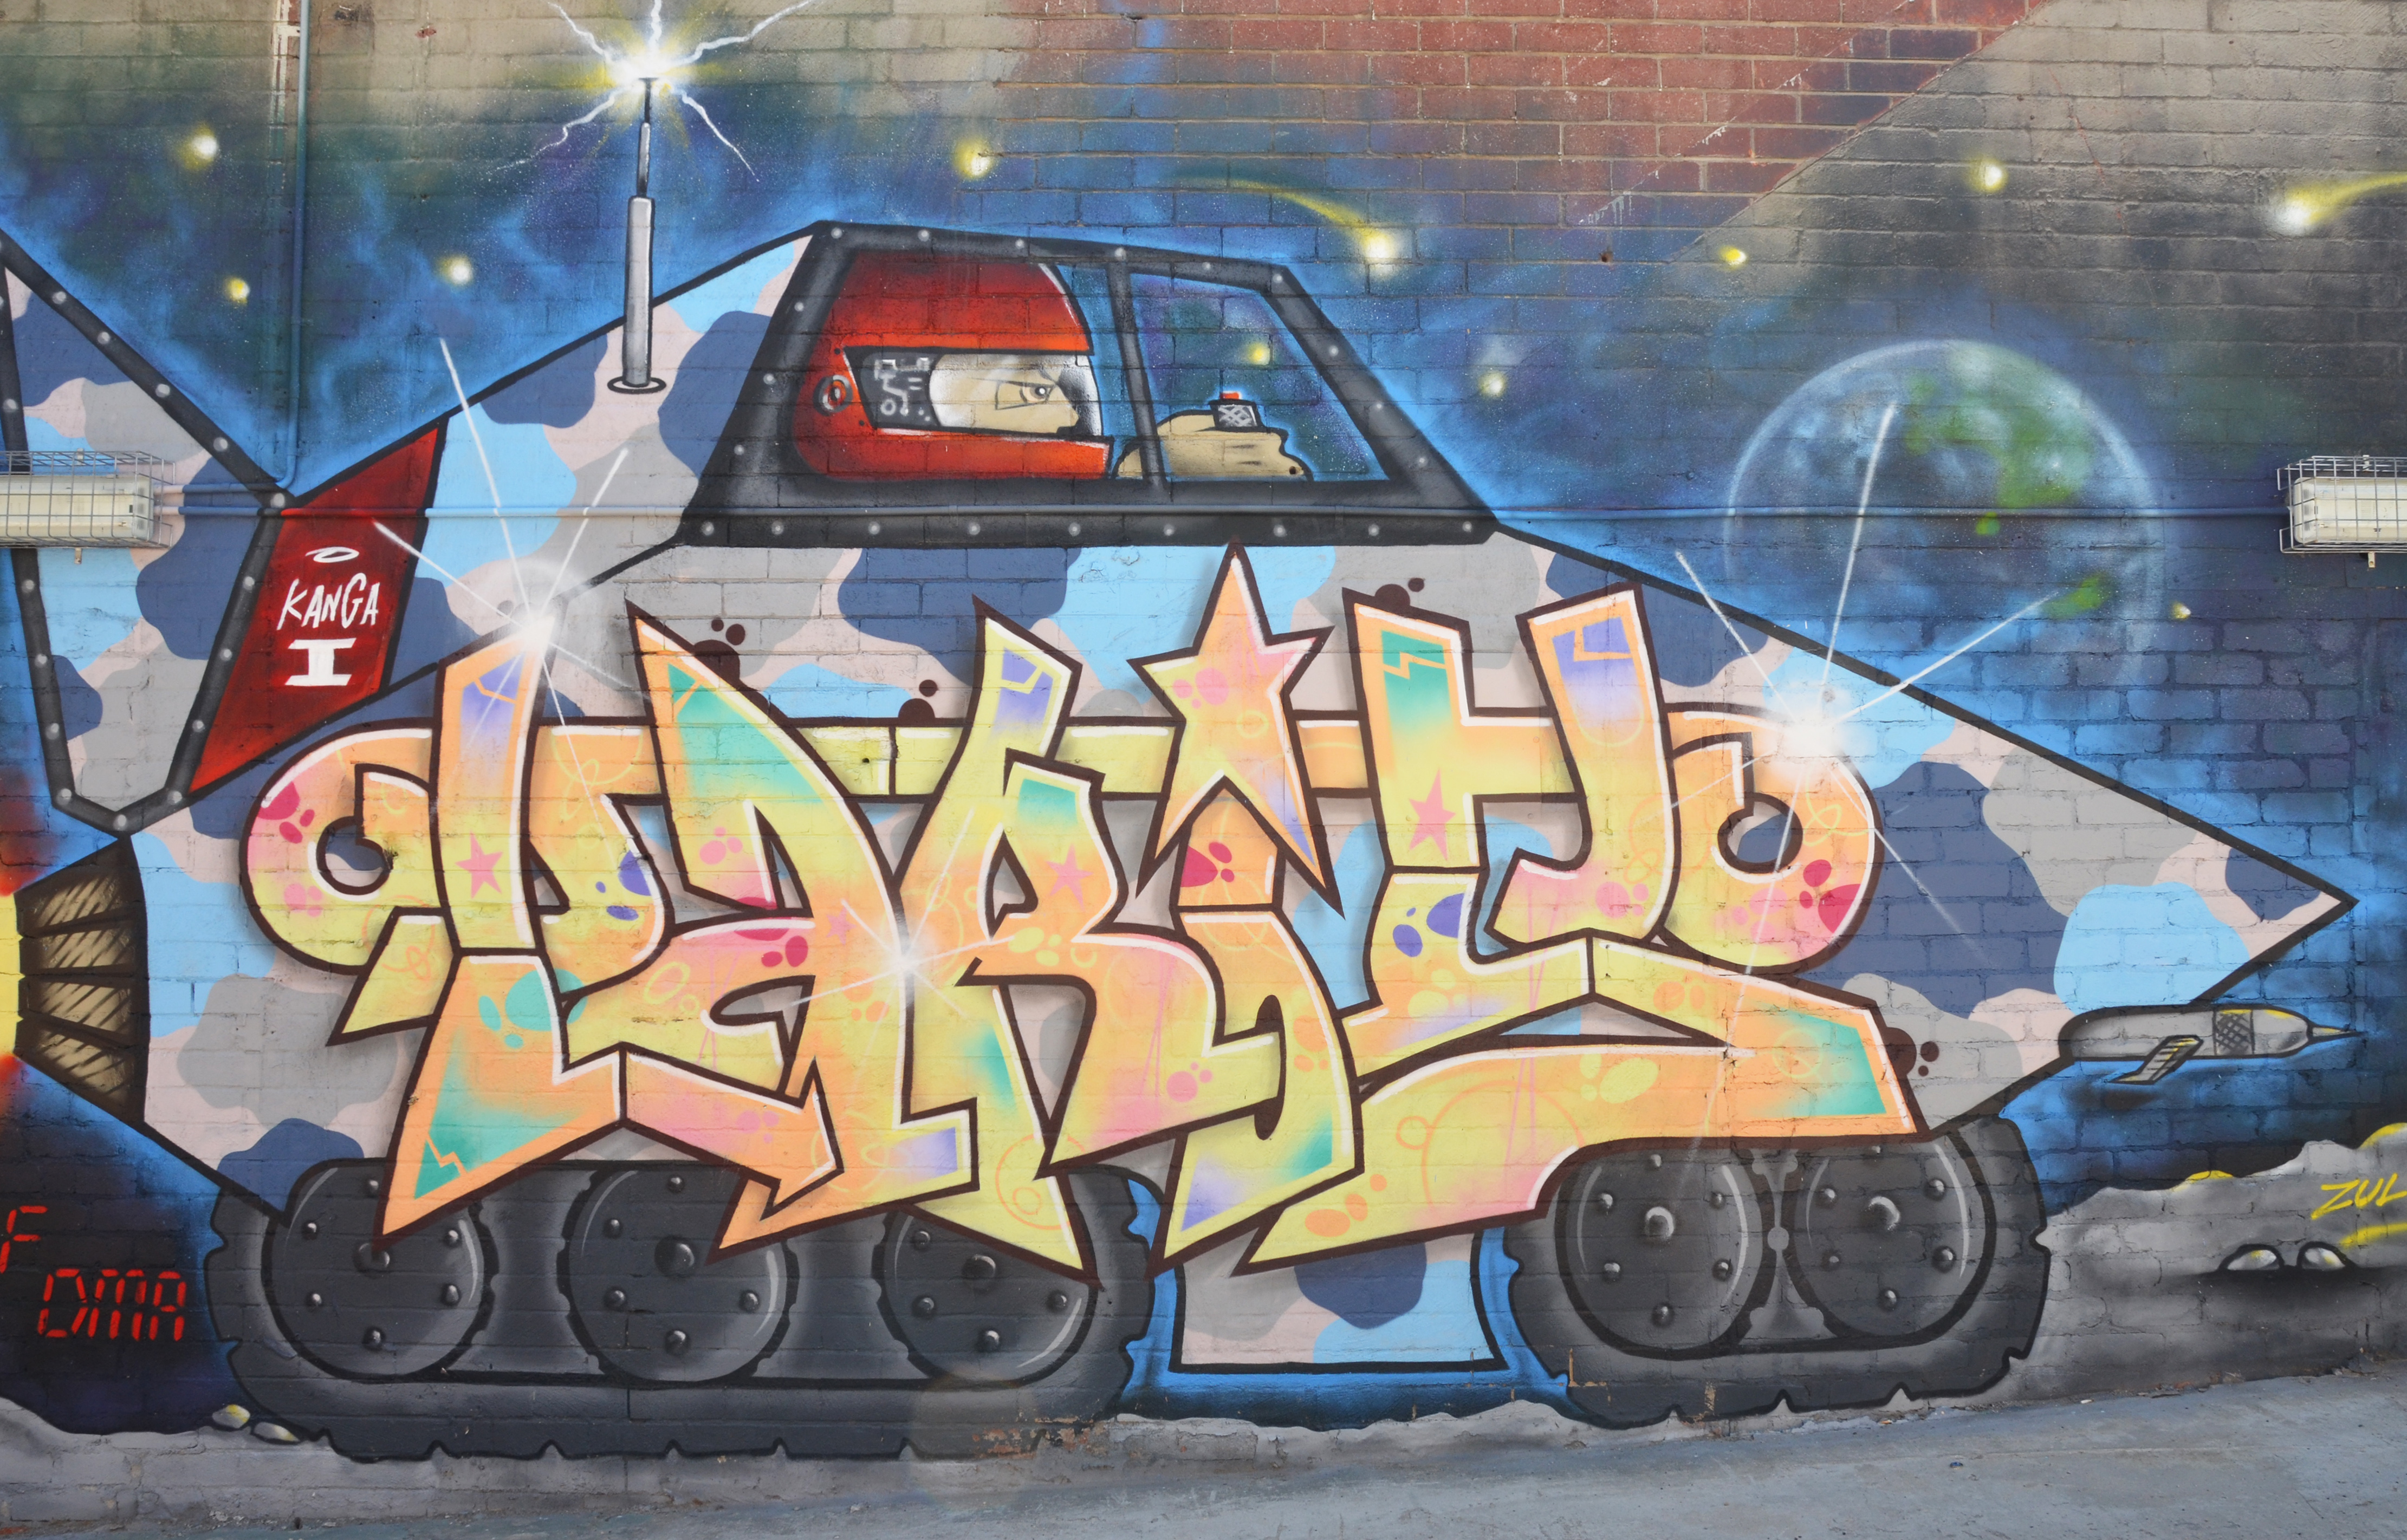 Street art painting of text within a large armed vehicle, large black tires